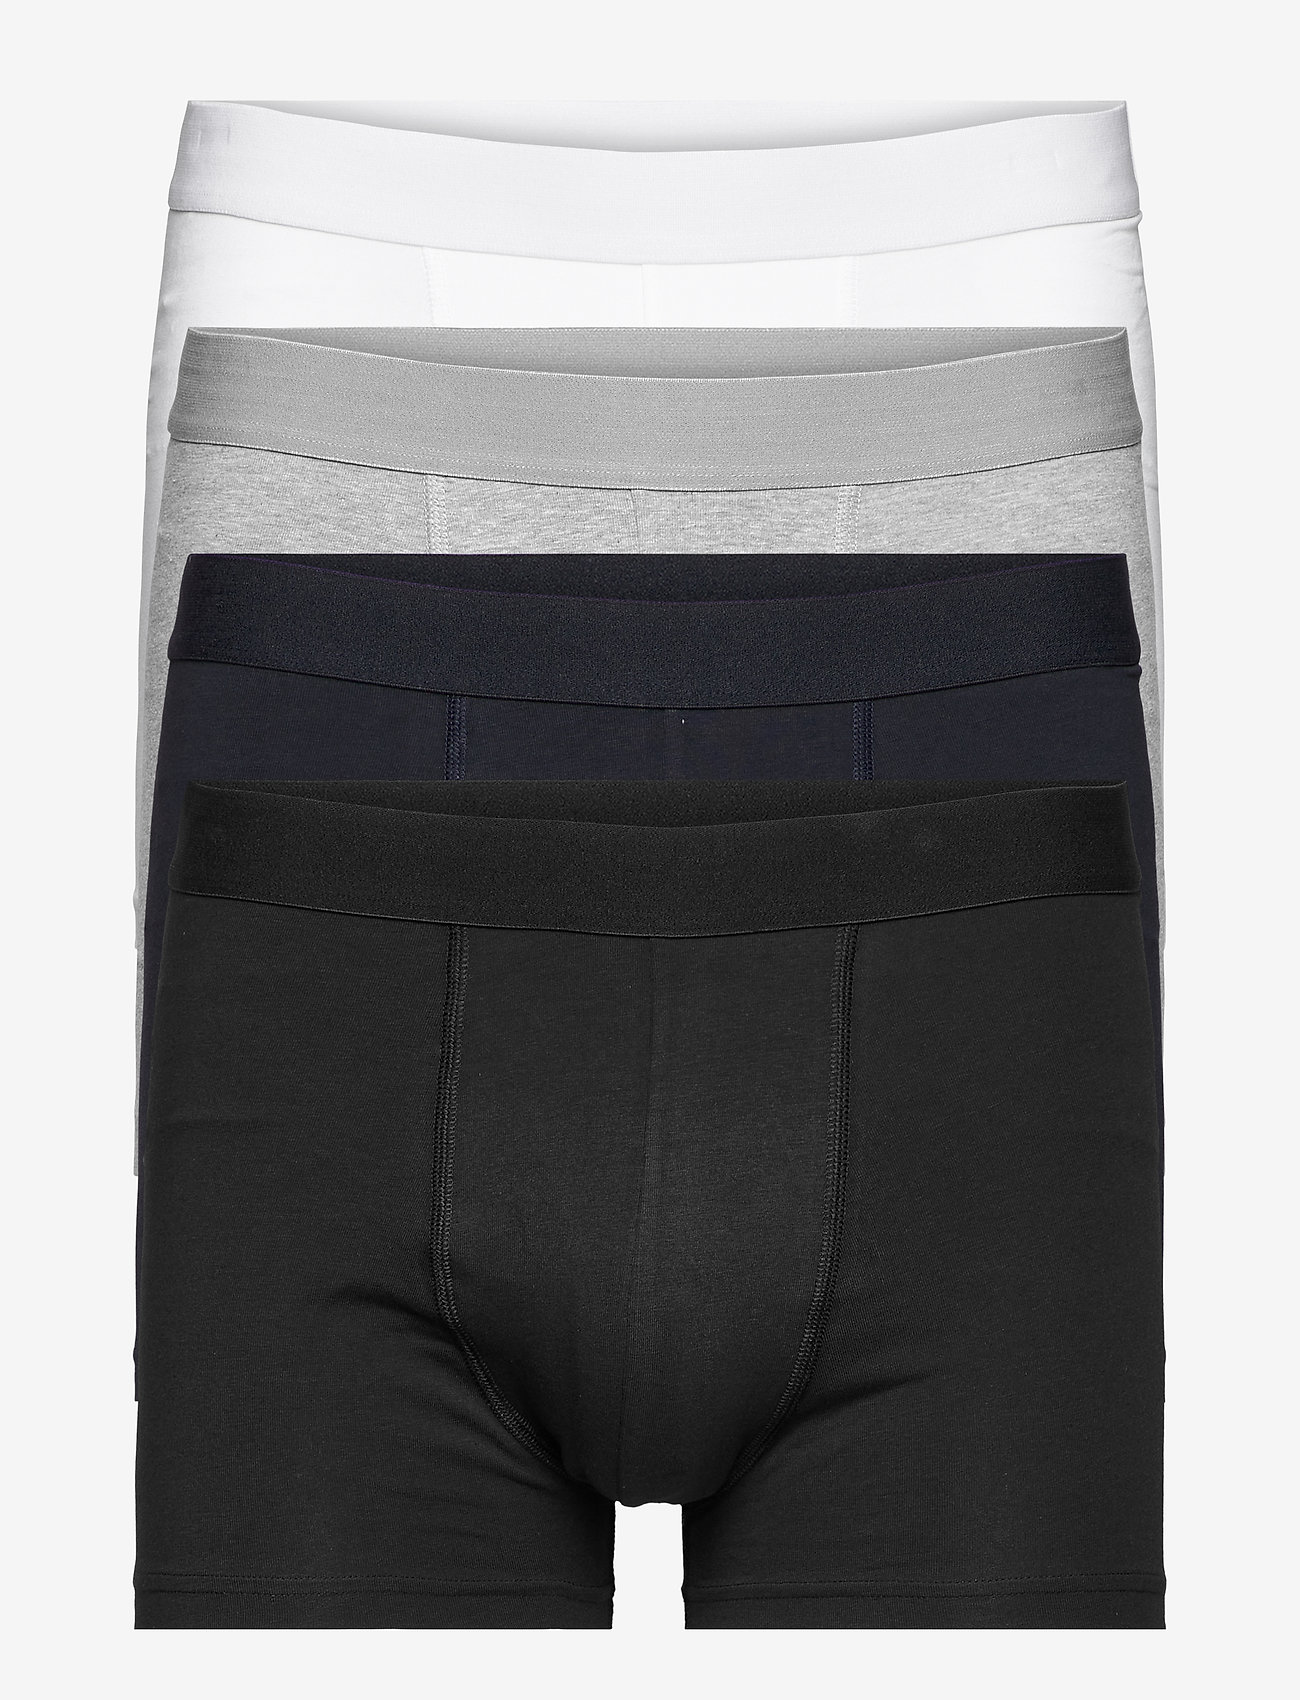 Bread & Boxers - Boxer Brief Multipack - boxershorts - white/back/grey/navy - 0